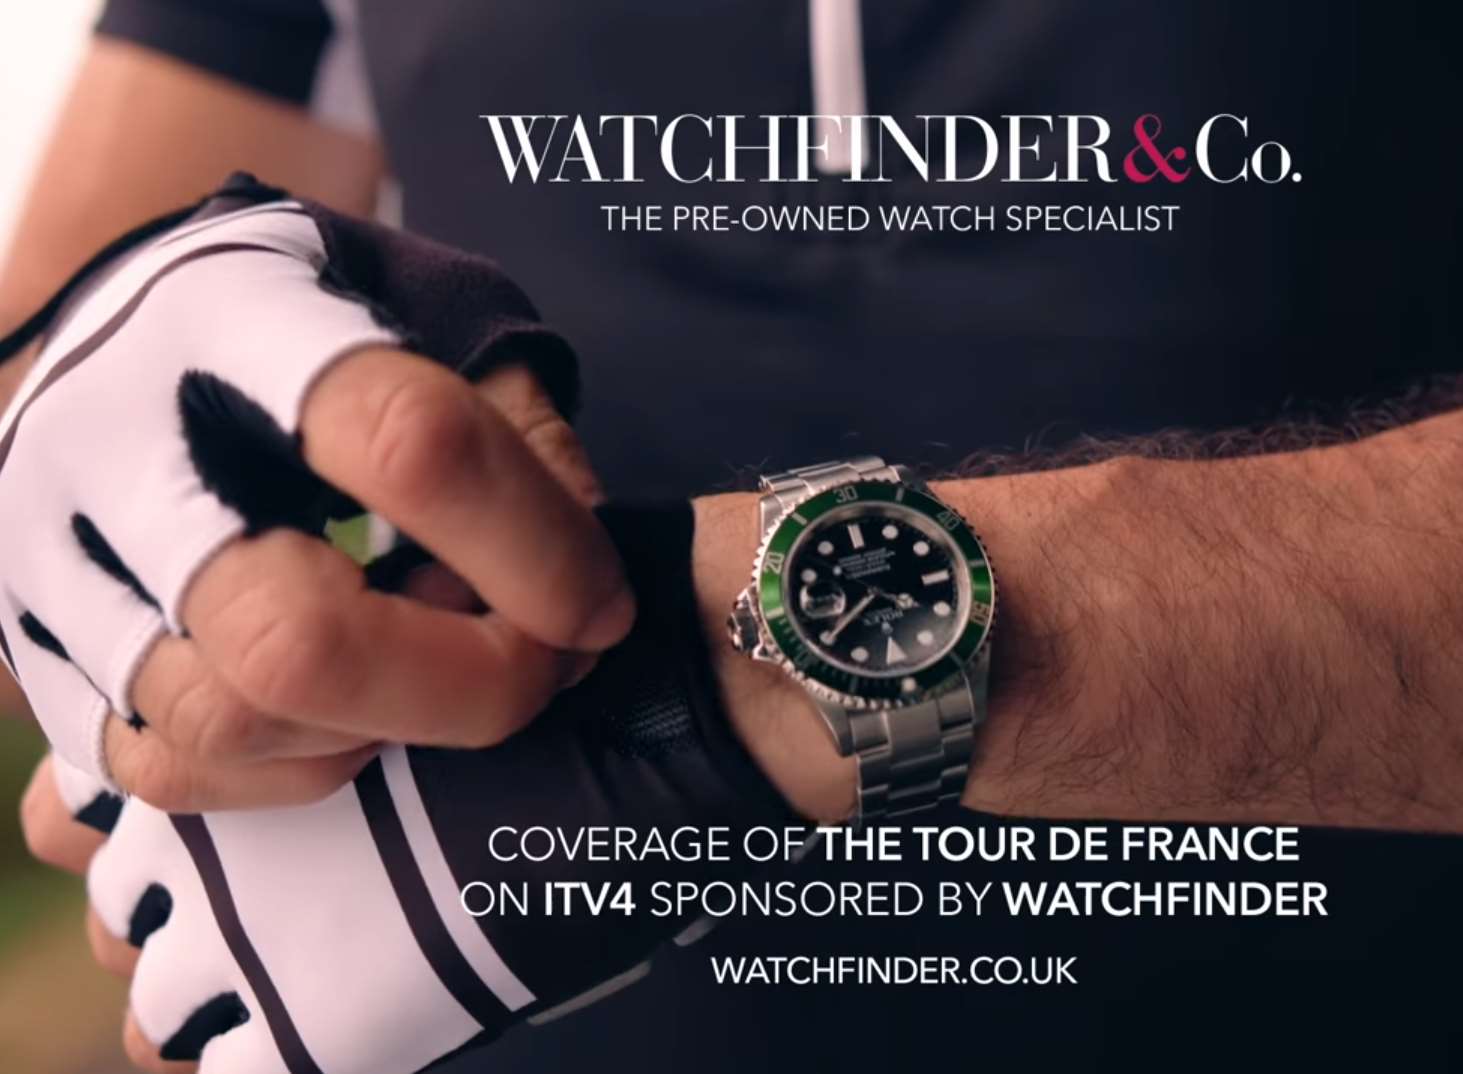 A screenshot from the advert featuring Maidstone-based company Watchfinder